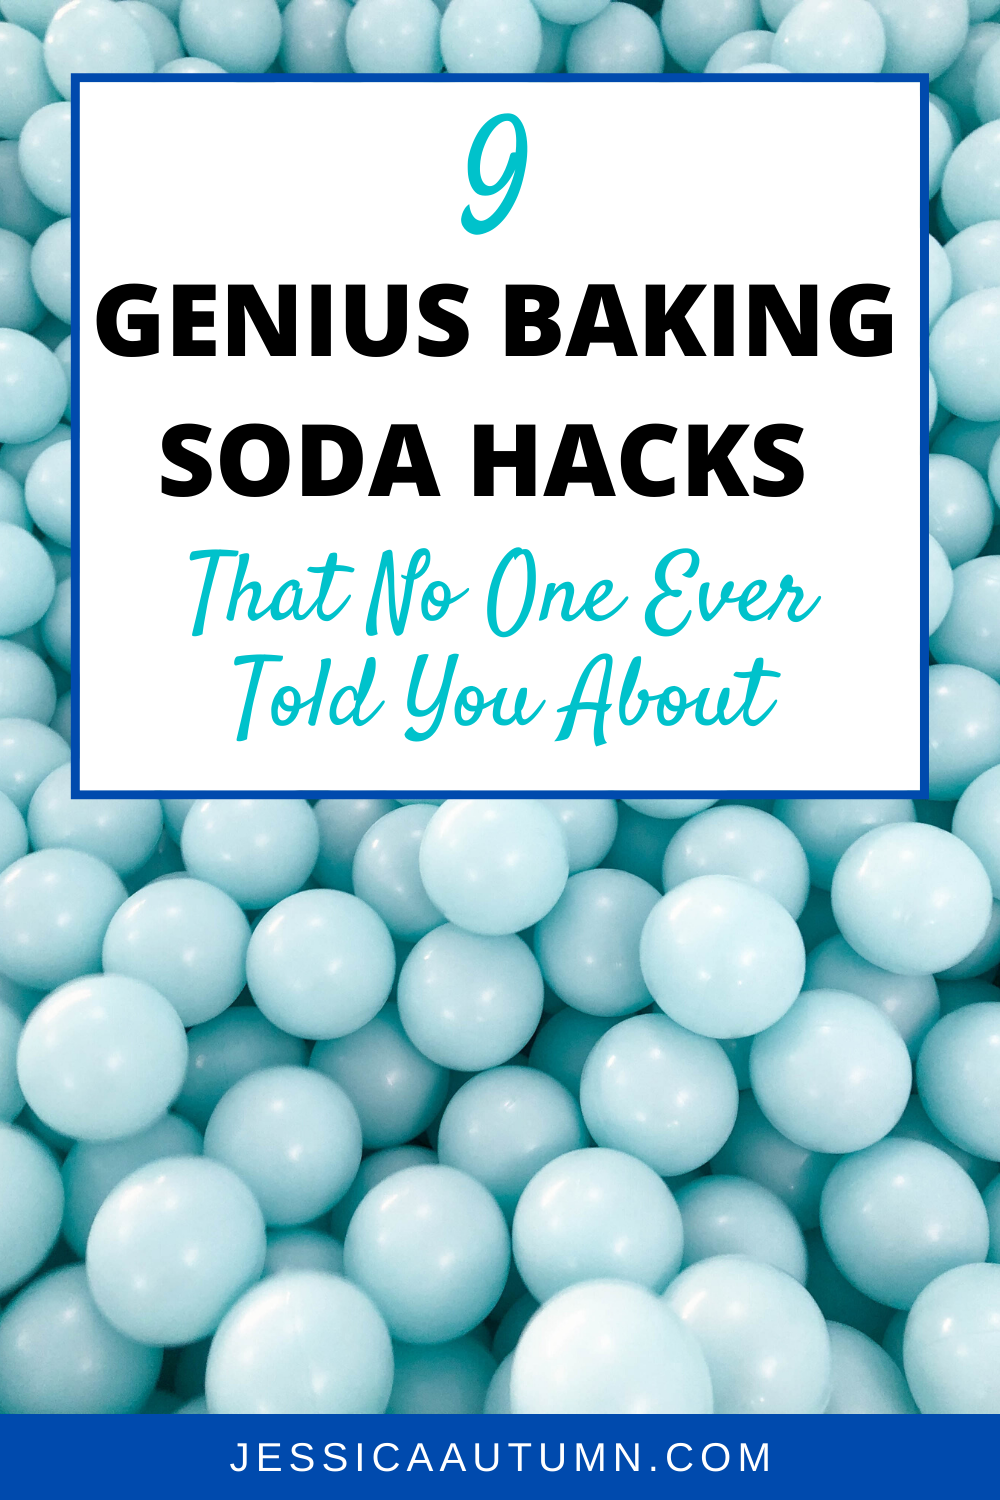 These DIY baking soda hacks for face, teeth whitening, for under eyes, and cleaning are AMAZING! There are so many uses for baking soda every one needs to know. Learn all the tricks and tips to make you like easier now!